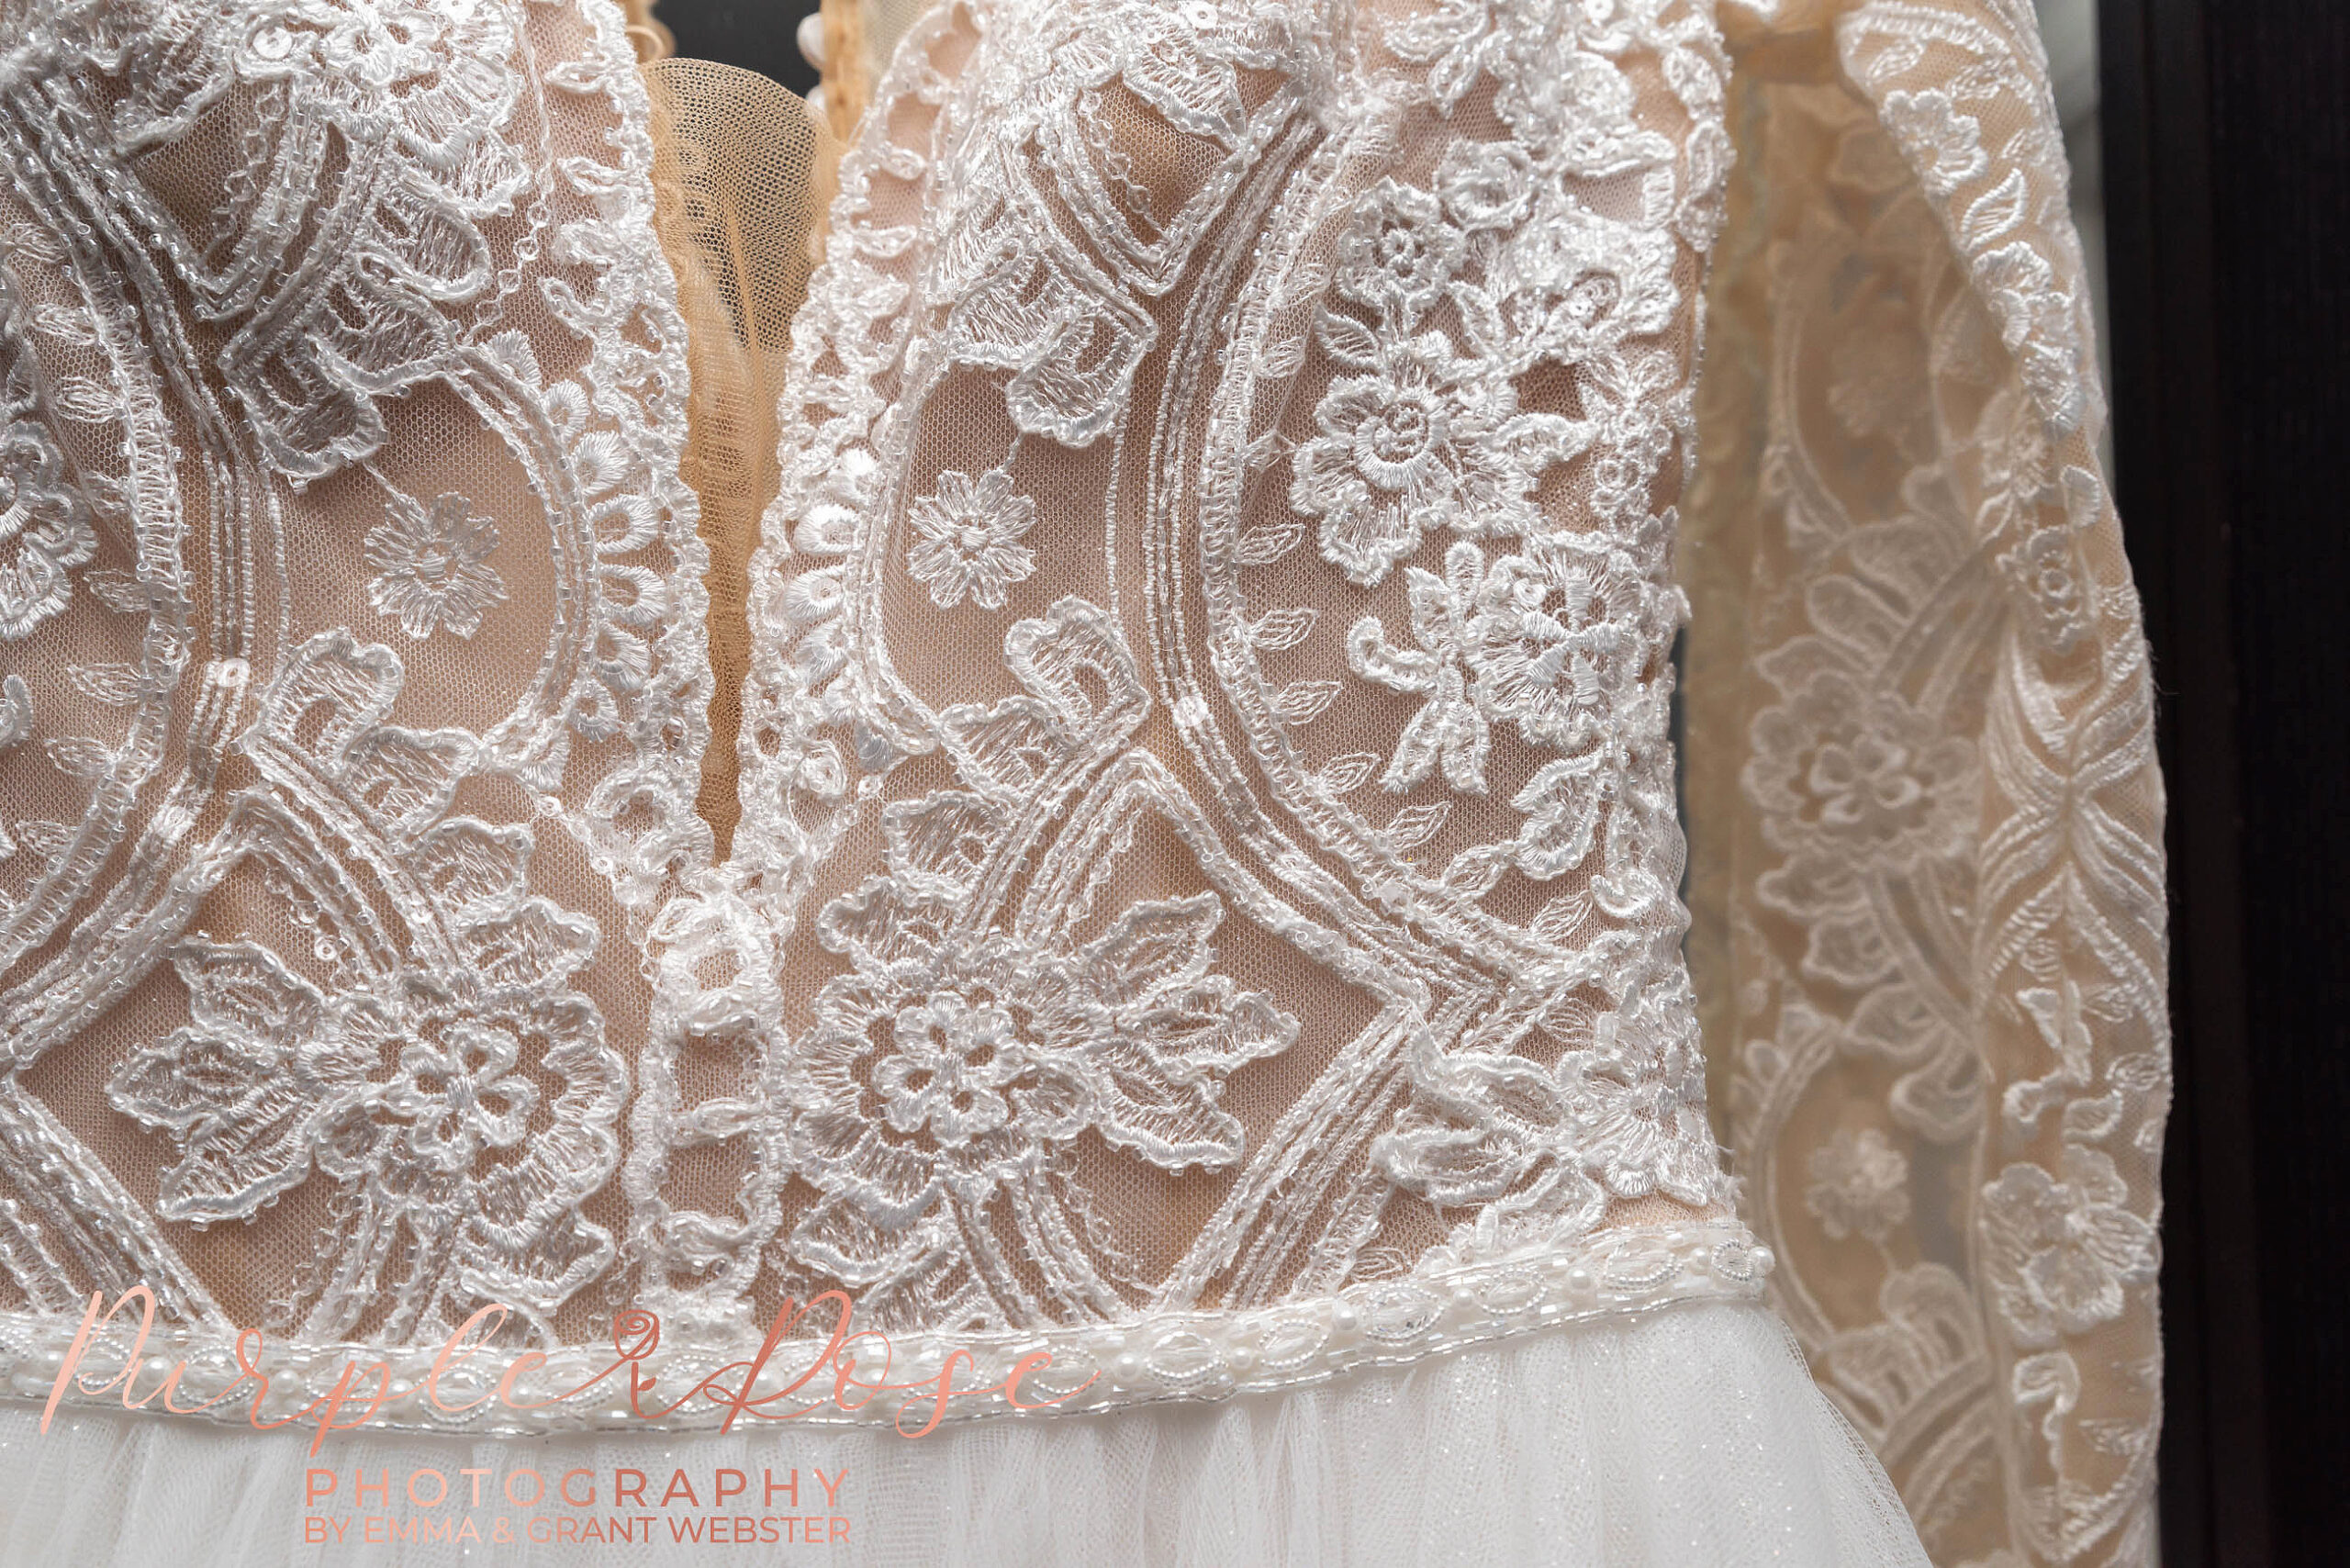 Photo of the lace detail of a brides wedding dress in Milton Keynes